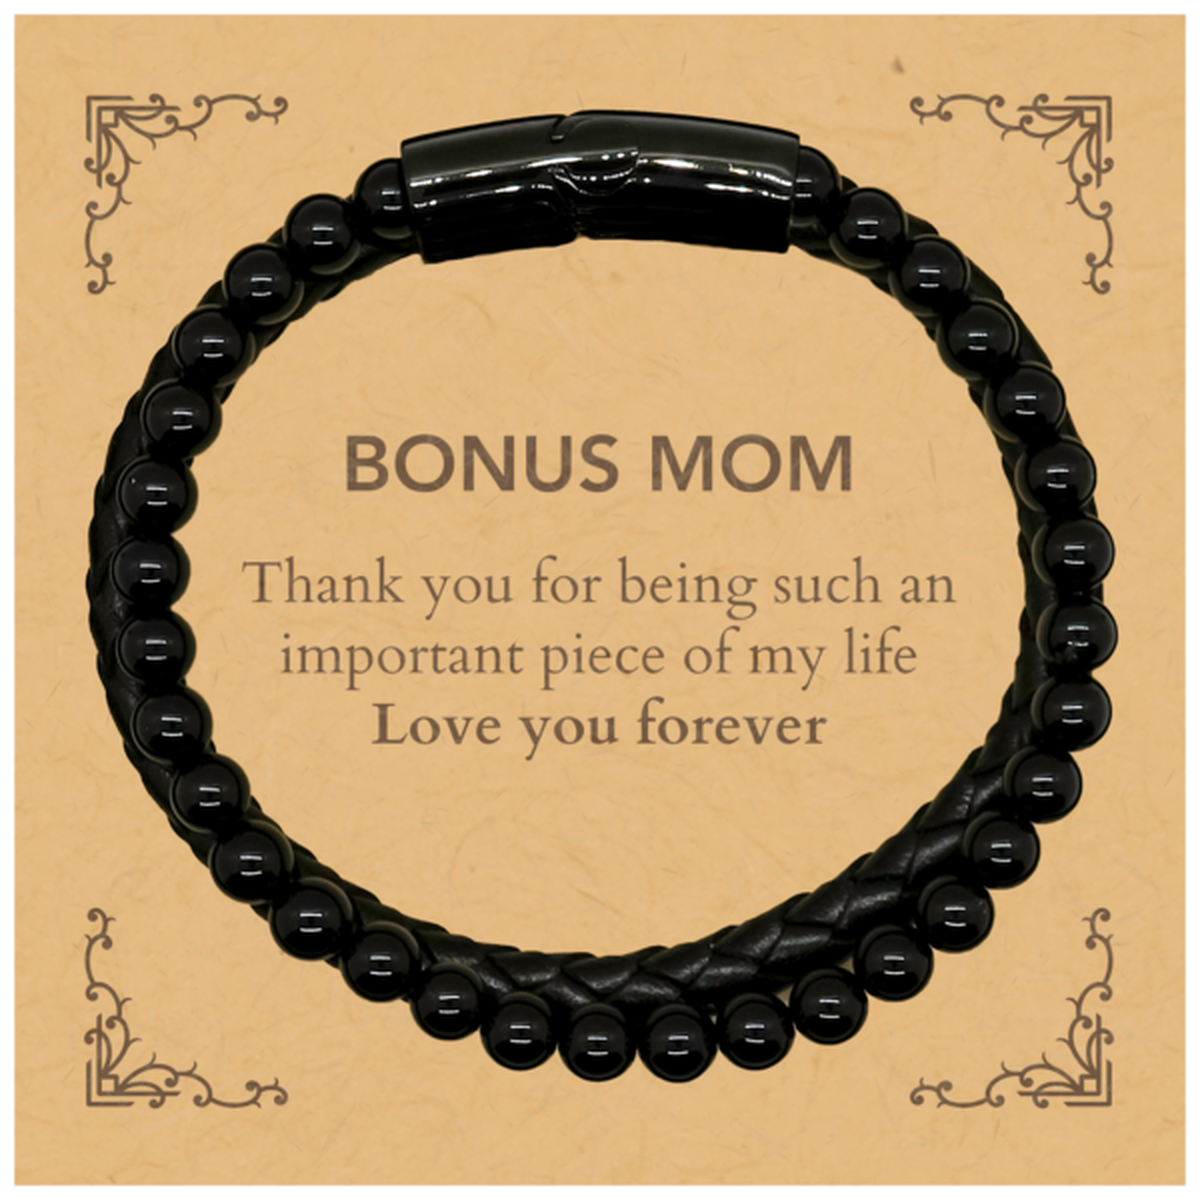 Appropriate Bonus Mom Stone Leather Bracelets Epic Birthday Gifts for Bonus Mom Thank you for being such an important piece of my life Bonus Mom Christmas Mothers Fathers Day